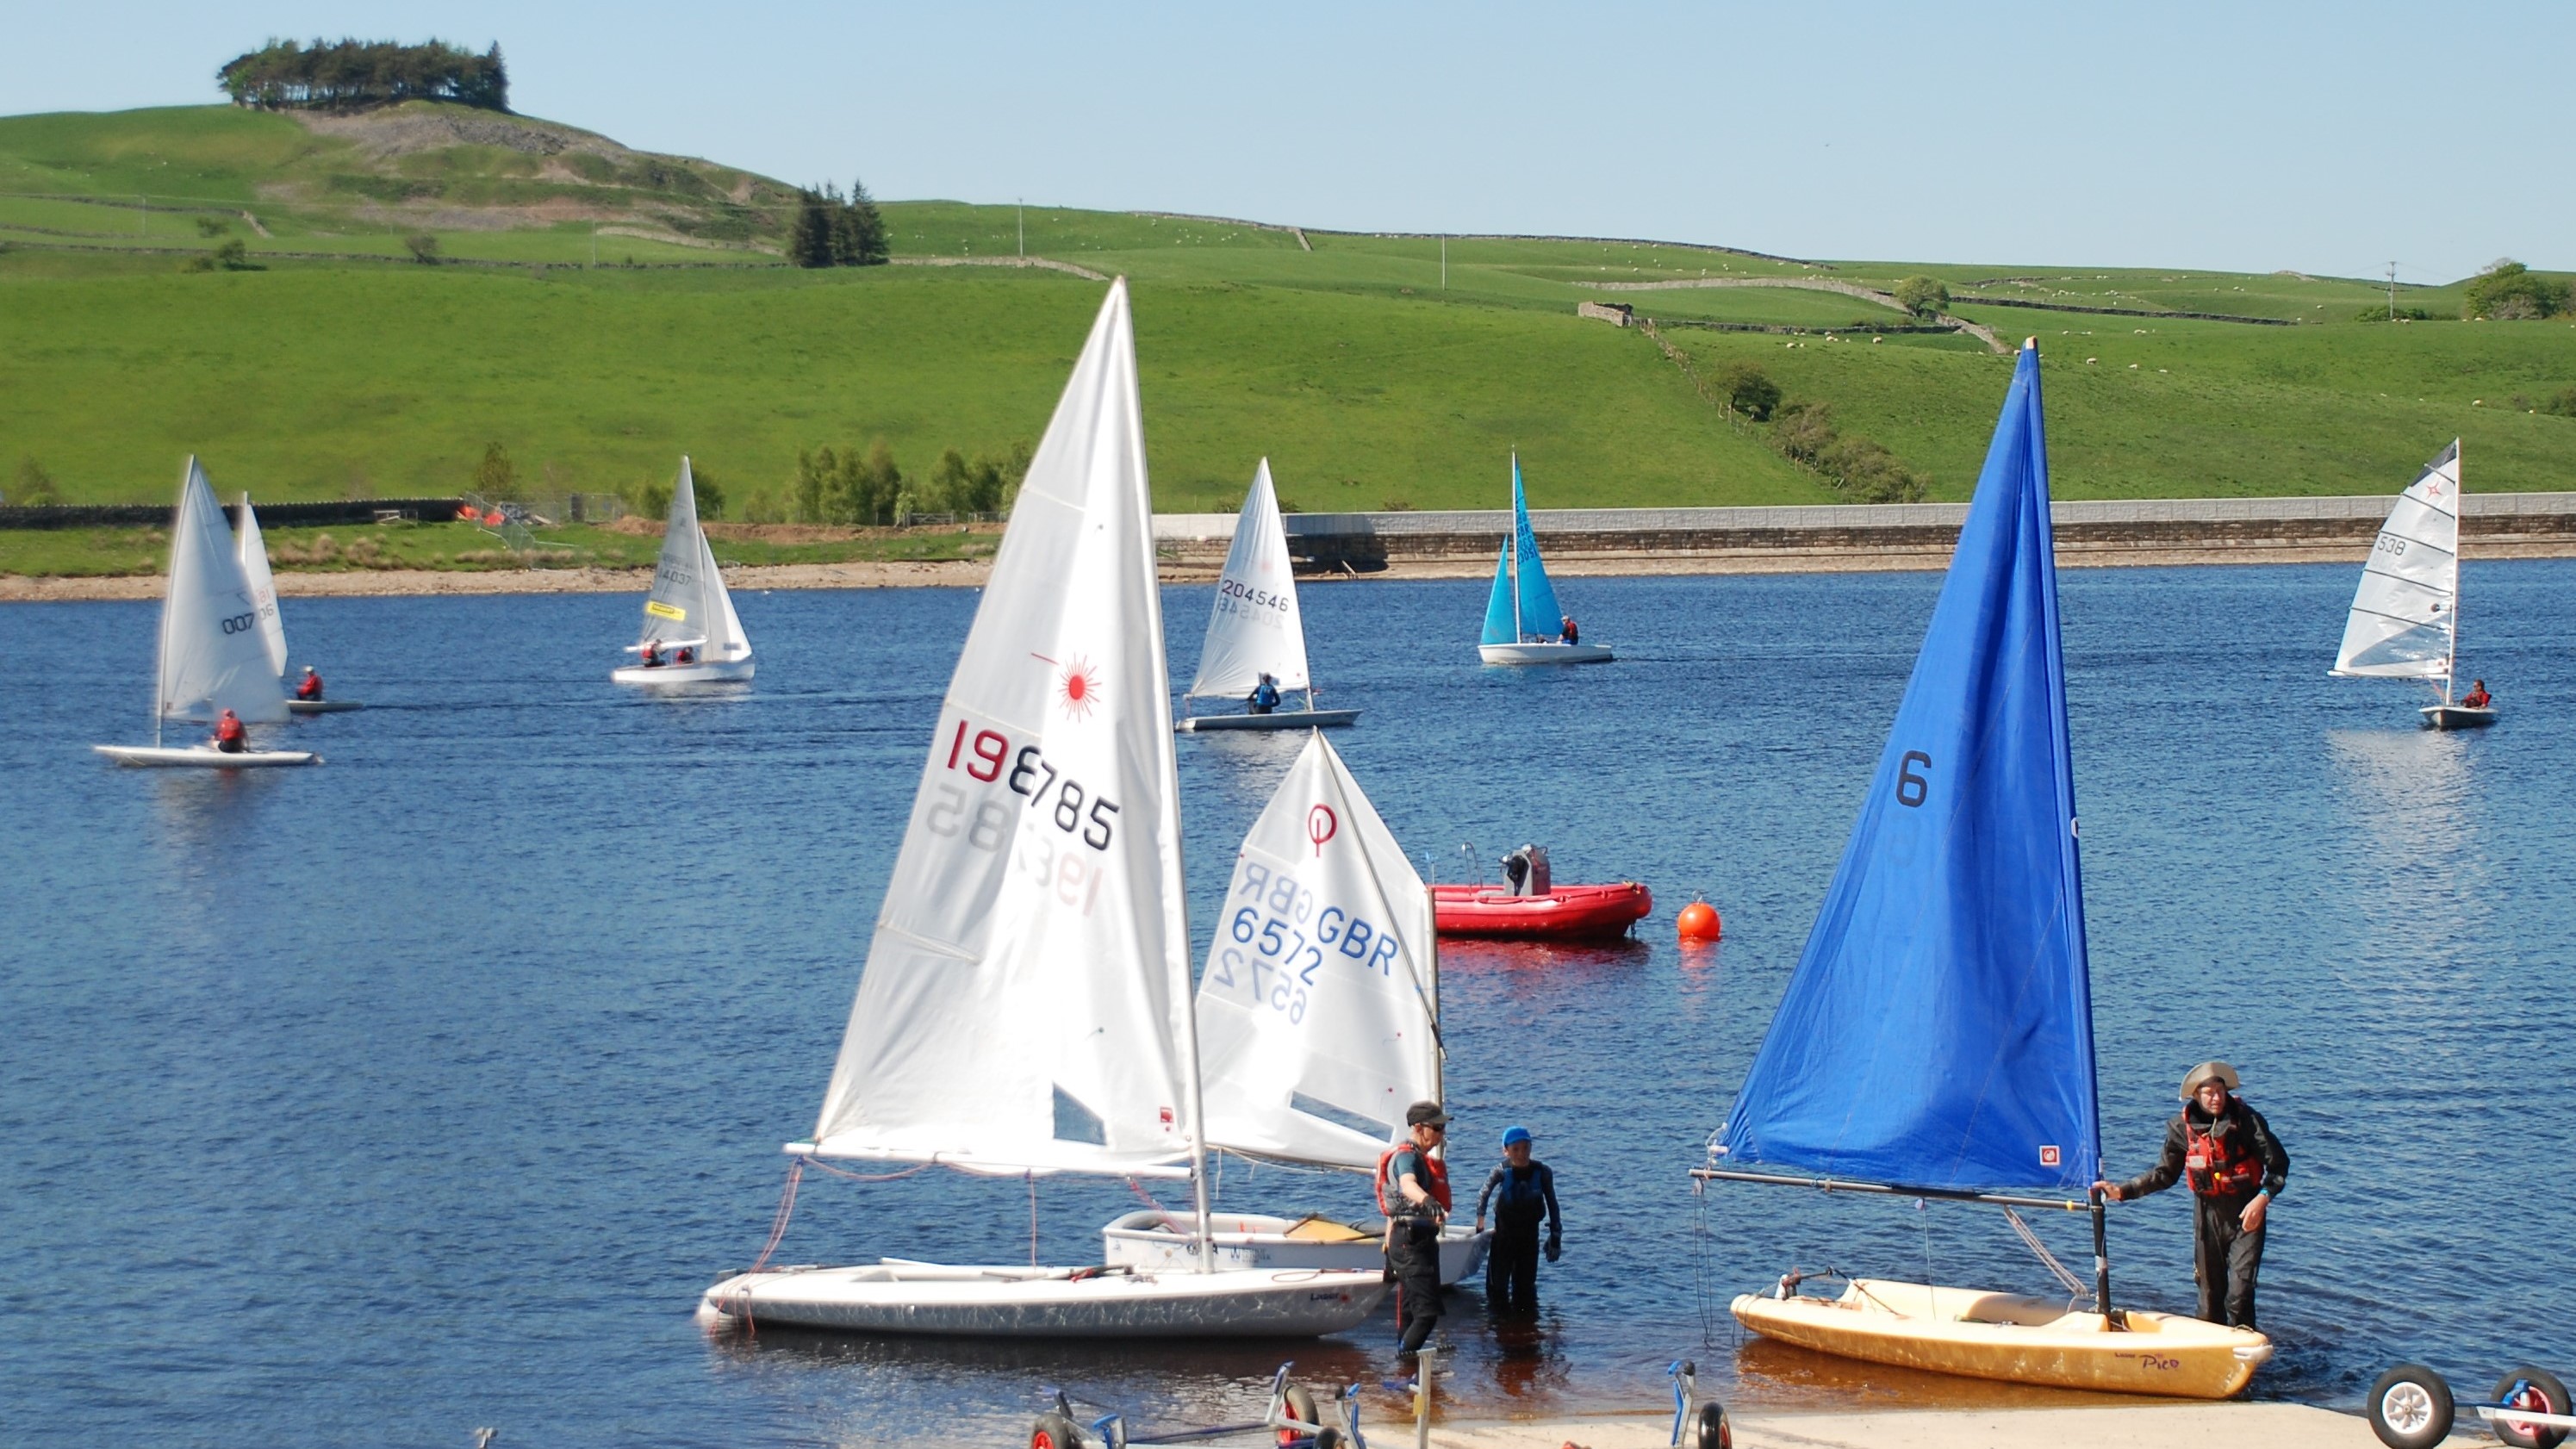 Sailing at Teesdale SWC which is in an area of Outstanding Natural Beauty.